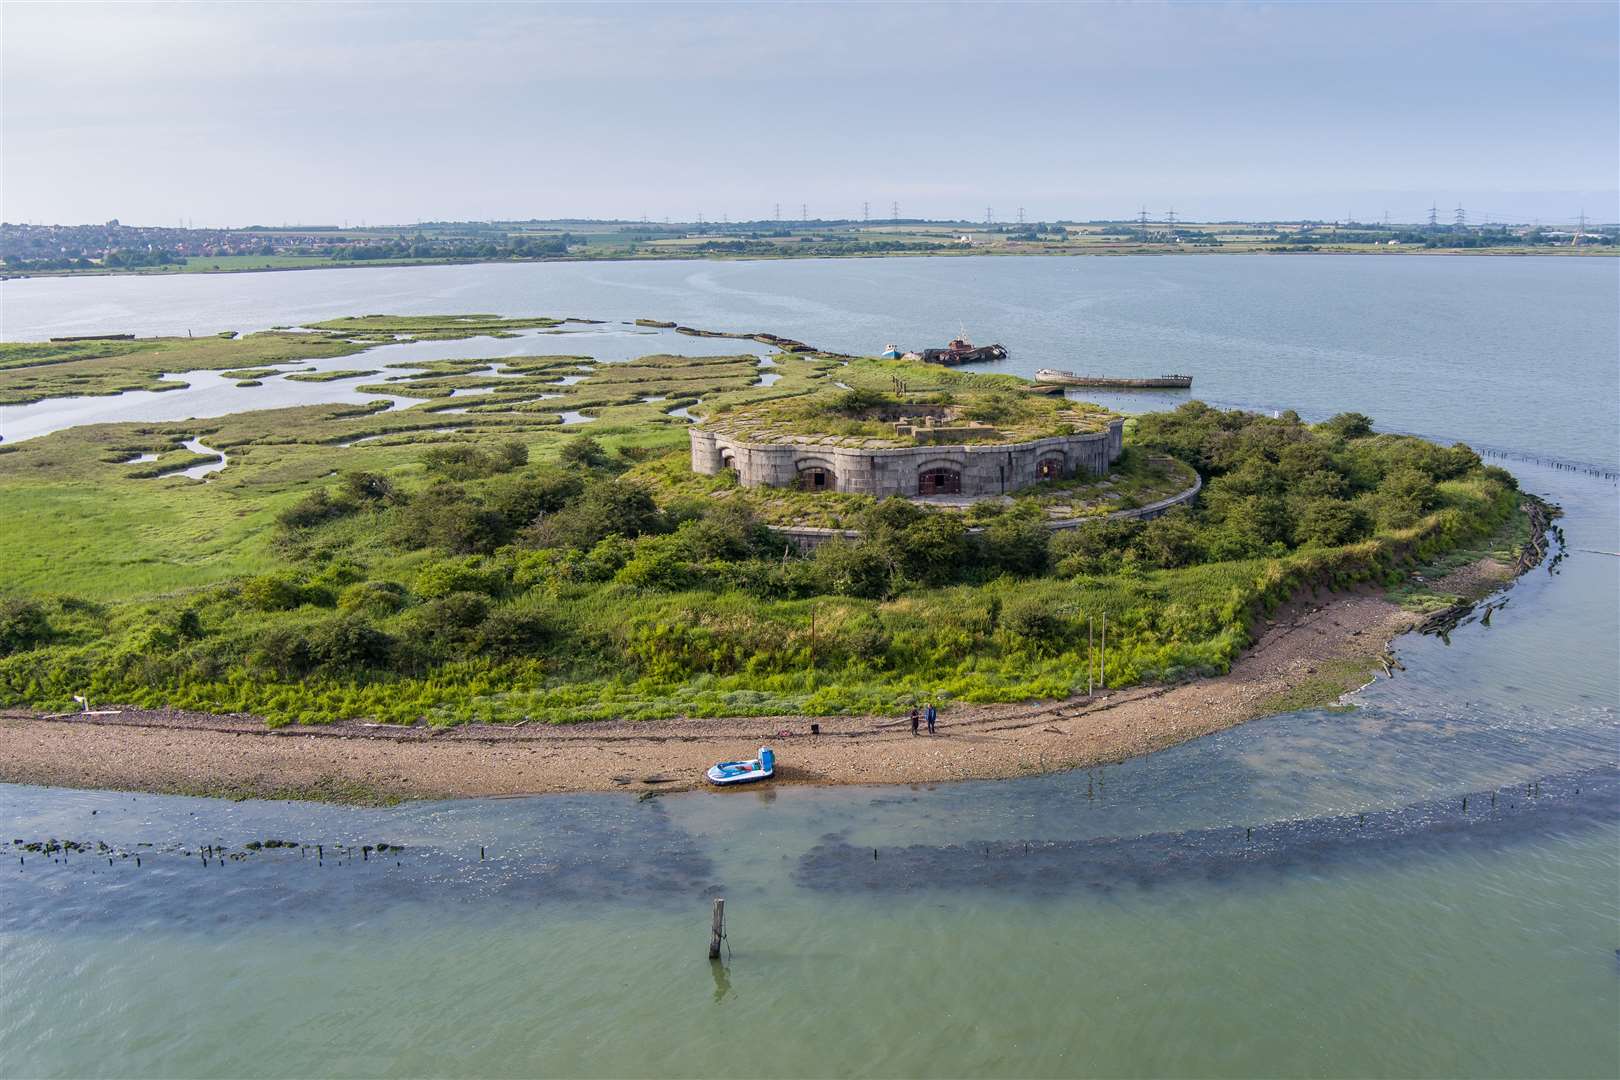 Hoo Fort, built in the 1870s as the twin to Darnet Fort, is located in the estuary of the River Medway. Picture: Aerial Imaging South East